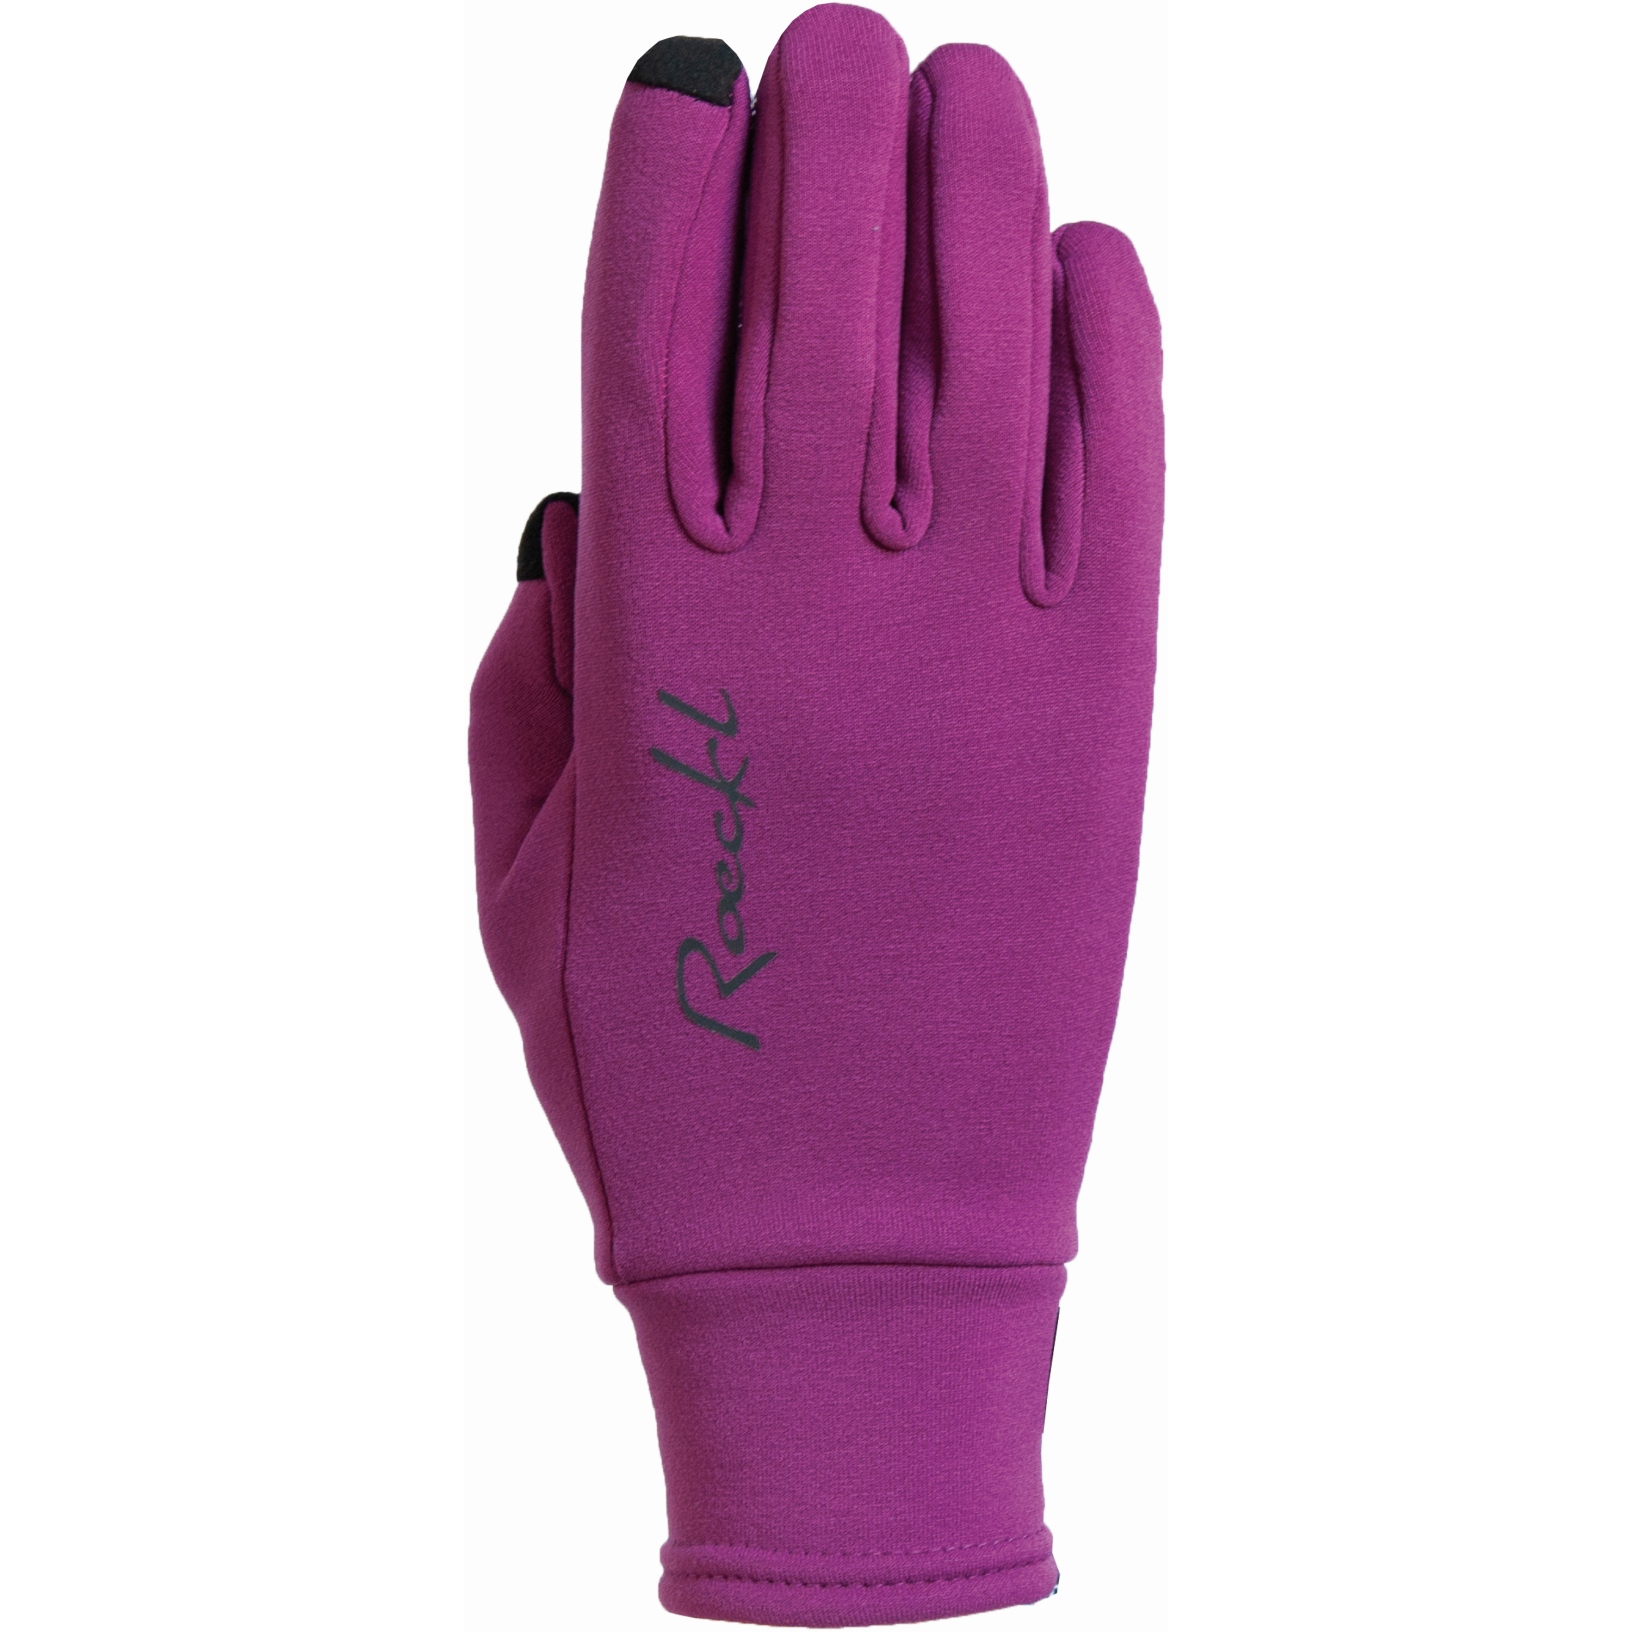 Image of Roeckl Sports Kailash Winter Gloves - berry 0640